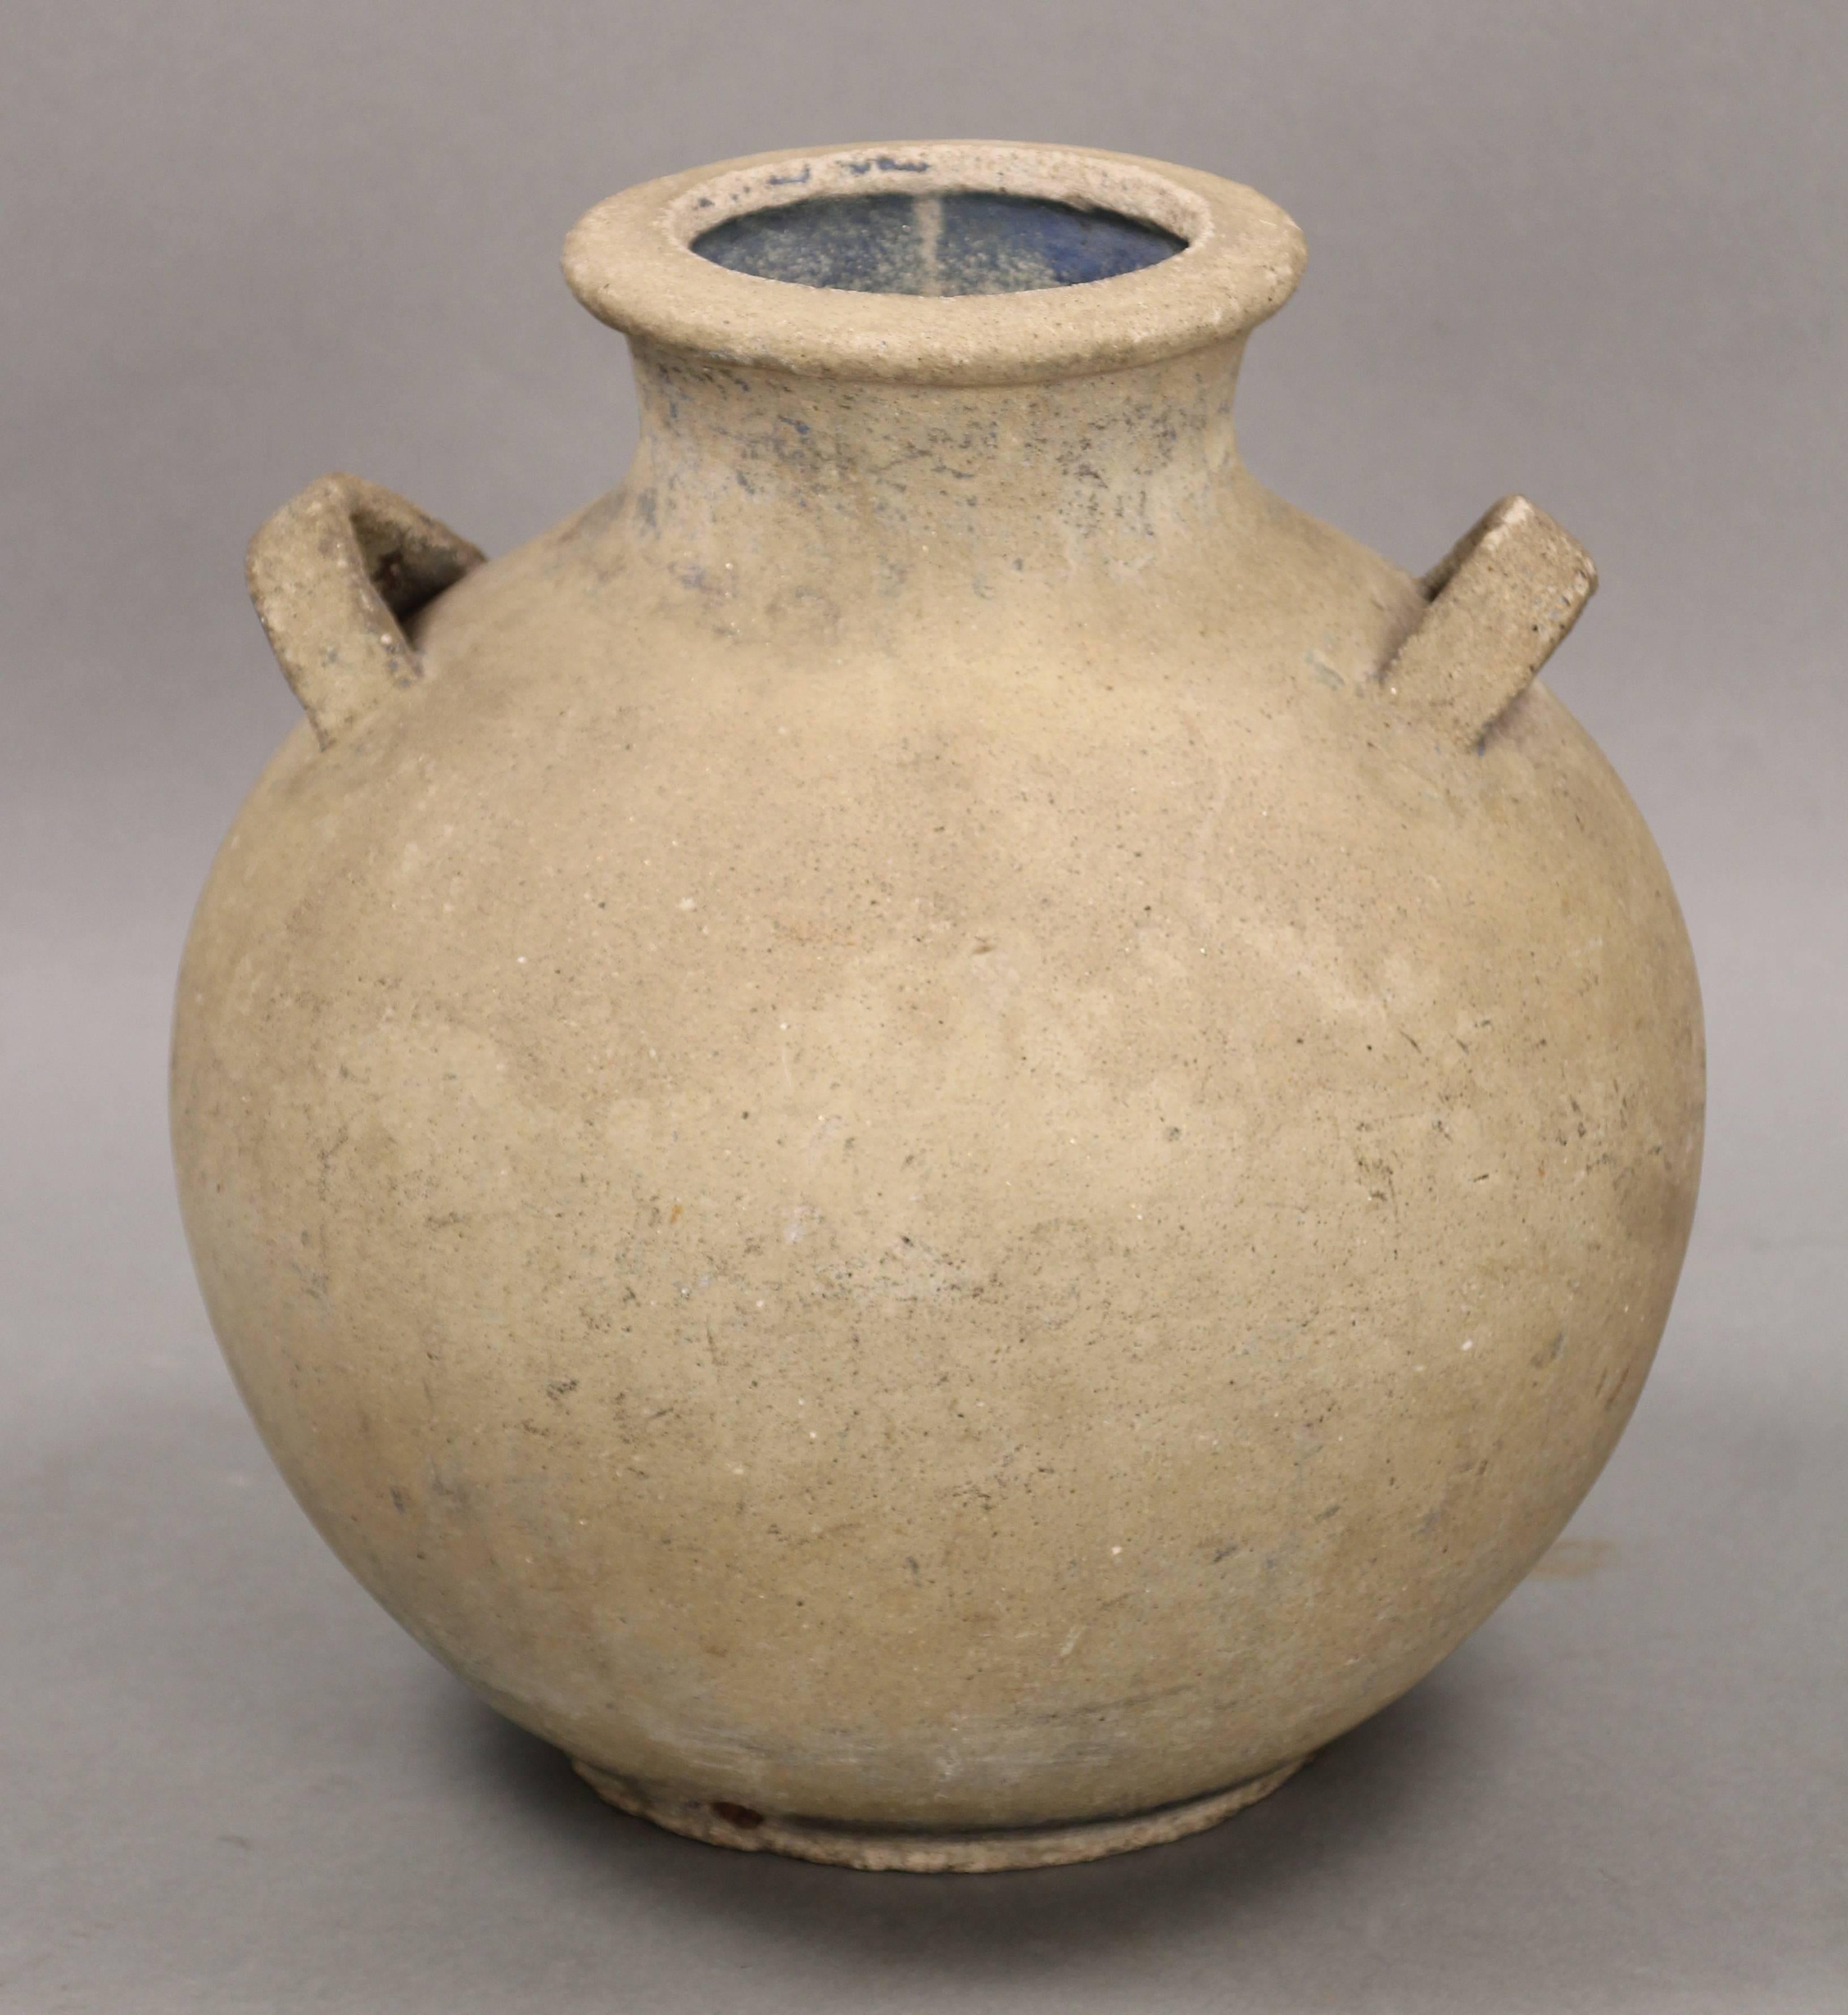 Simple spherical form with lobed handles with smooth surface and earthy coloring. Small chip on base. Hillside Pottery was an important manufacturer in Los Angeles in the 1920s and is now very sought after by collectors of Spanish Revival items.